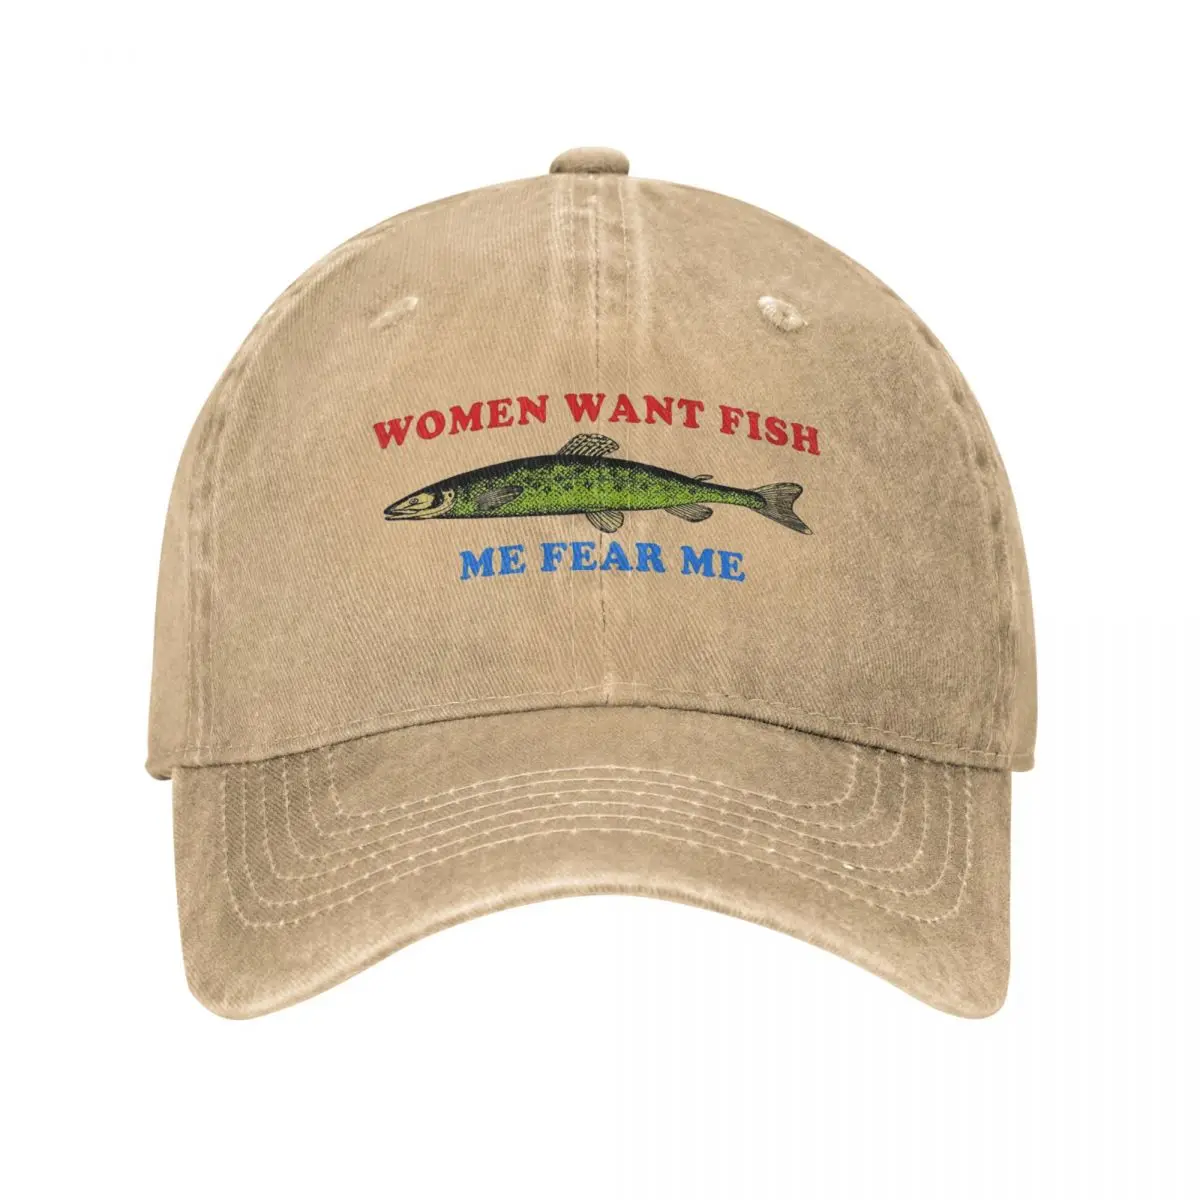 

Women Want Fish Me Fear Me Baseball Cap Stuff Vintage Distressed Washed Funny Logo Dad Hat Casquette Unisex Style Outdoor Travel